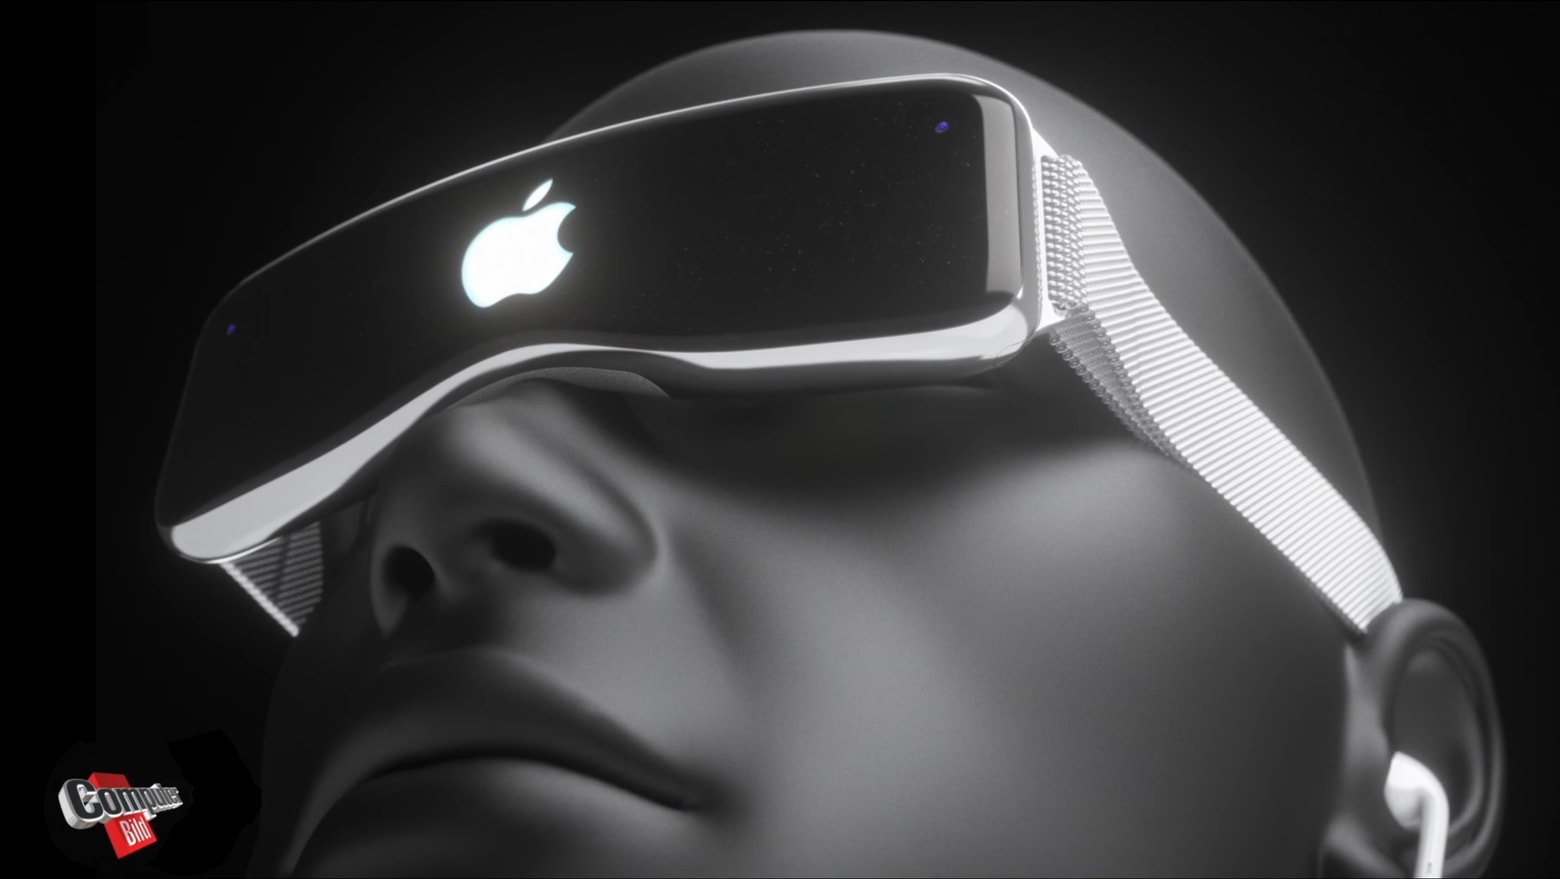 Tim Cook says “stay tuned” for Apple’s AR’s headset